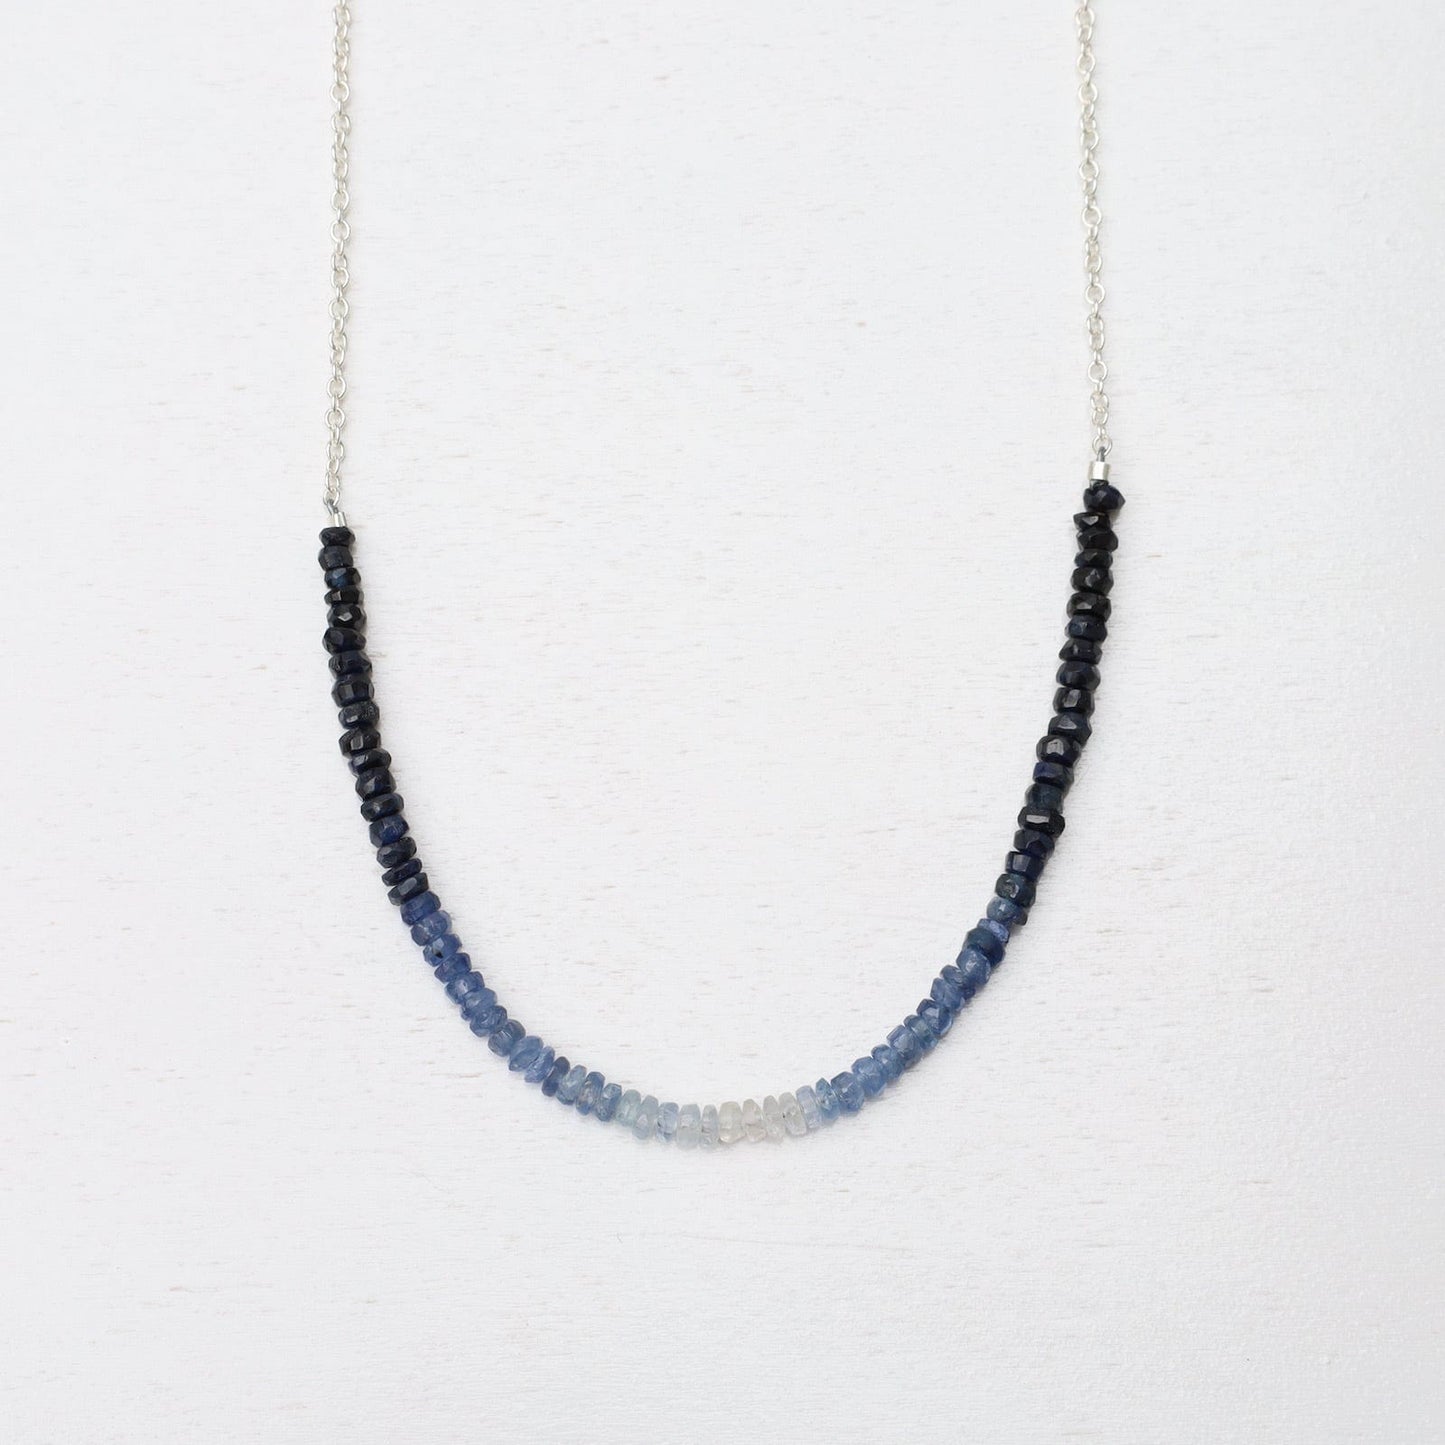 NKL Gemstone Rondelle Necklace in Sapphire Fade